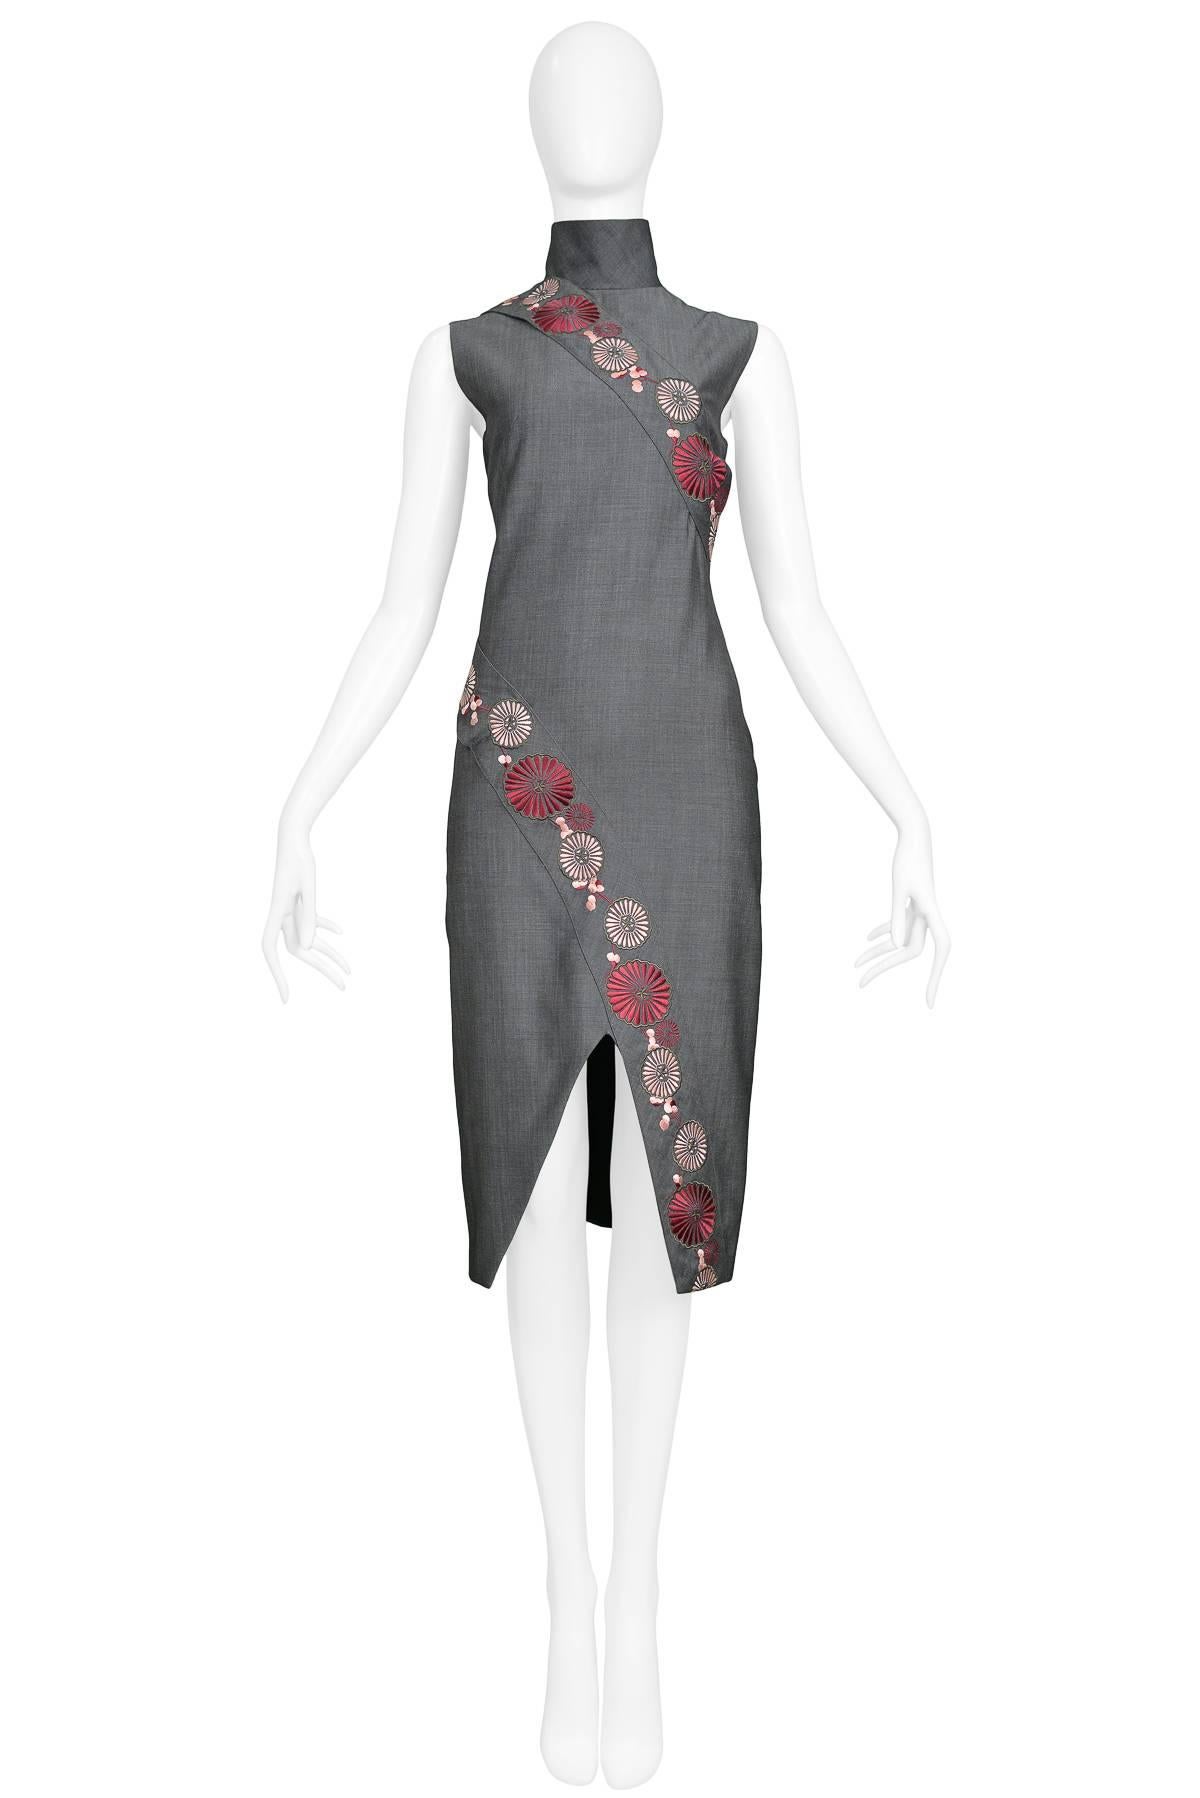 Vintage Alexander McQueen grey wool and pink & burgundy floral embroidered cheongsam inspired dress. Runway pieces from the Spring/Summer 2001 